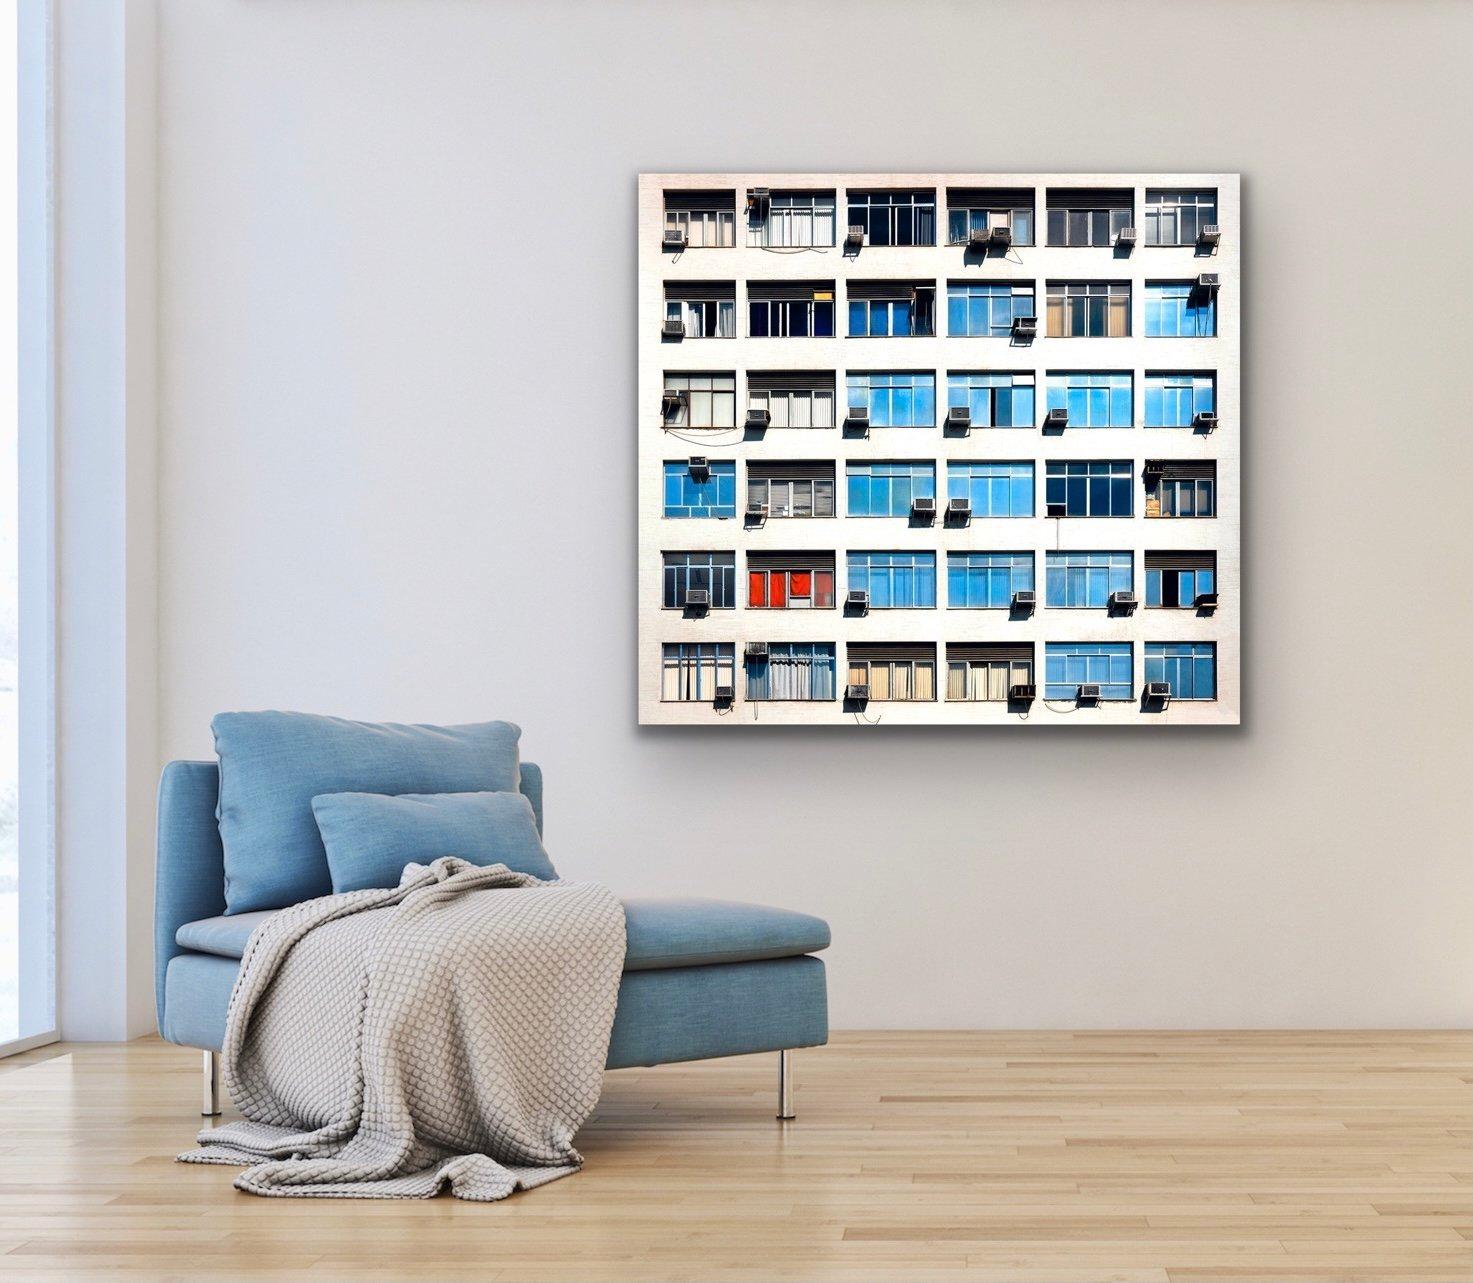 18 Flats by Barry Cawston 90cmx82.5cm C-type photograph with Acrylic Face Mount For Sale 1